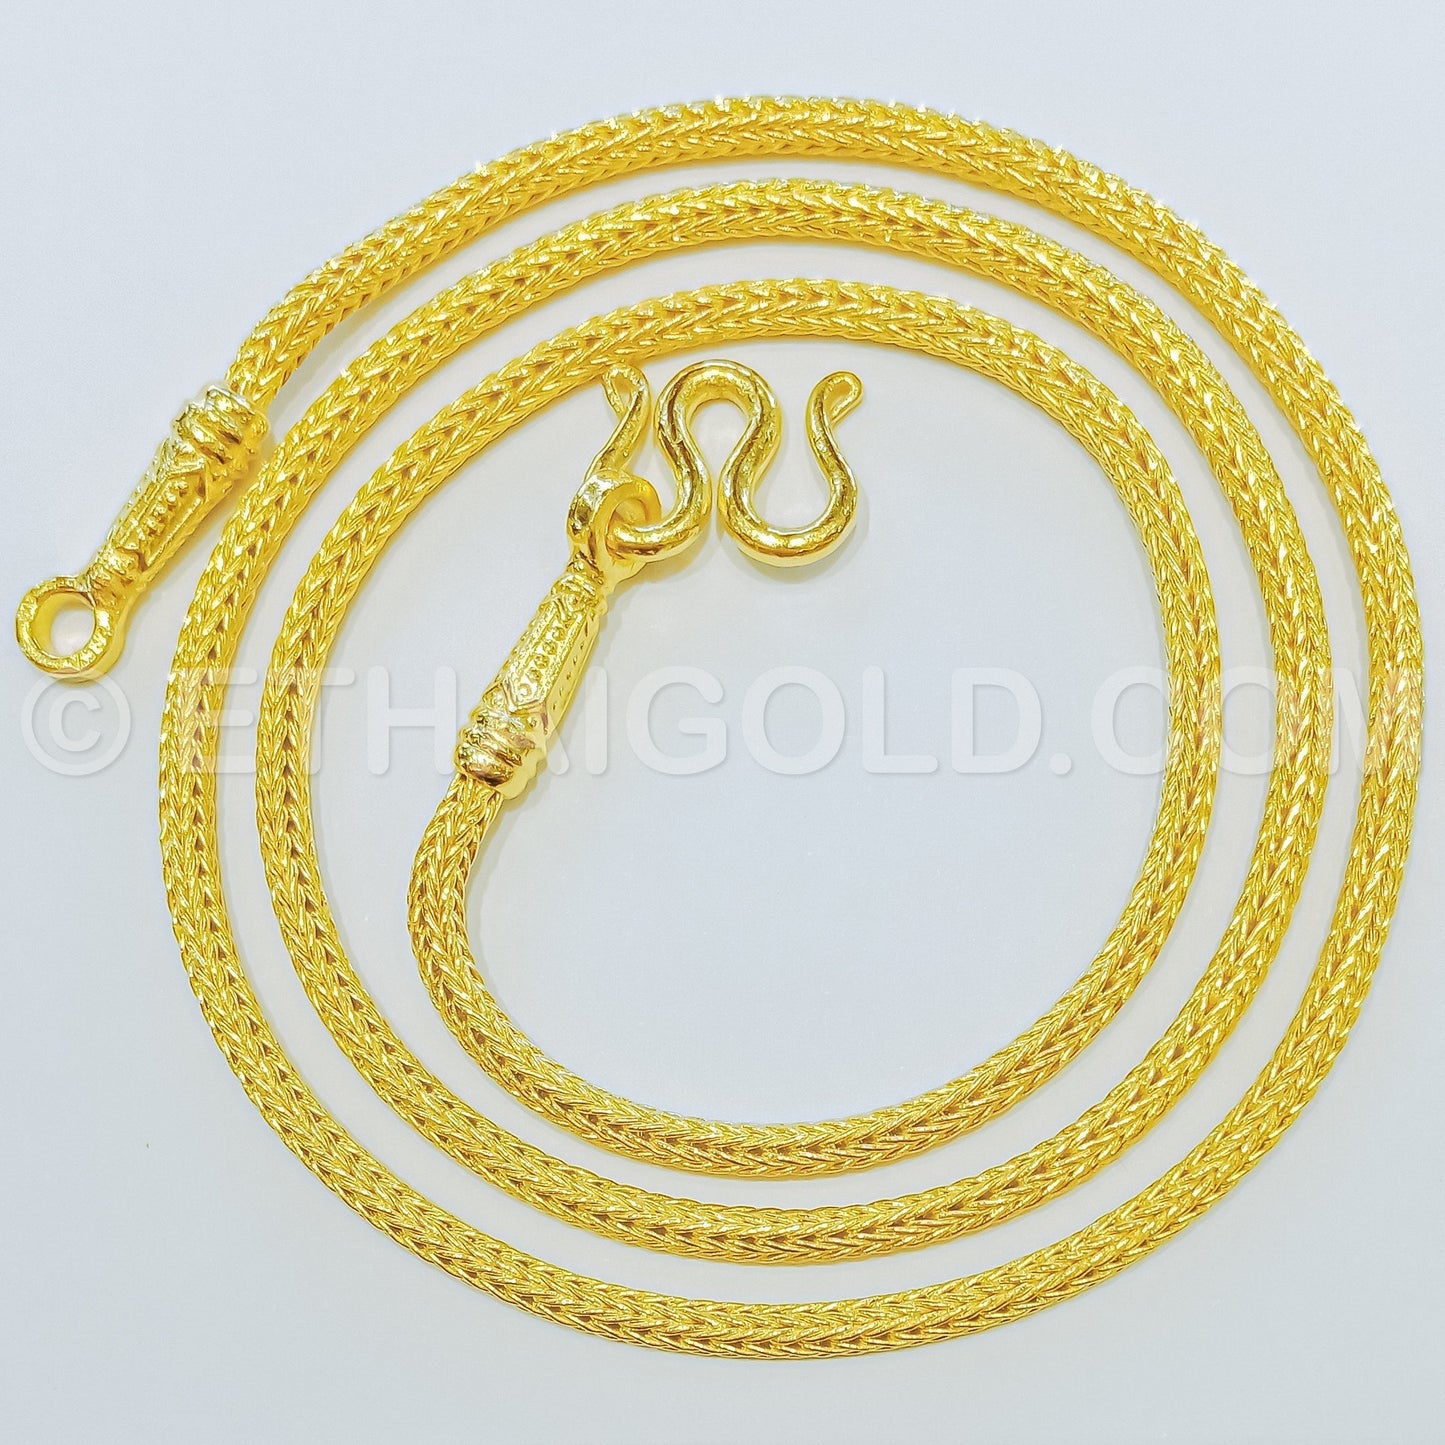 NATURAL DIAMOND 10k YELLOW GOLD MESH NECKLACE V SHAPE CHAIN 1 CARAT JEWELRY  GIFT